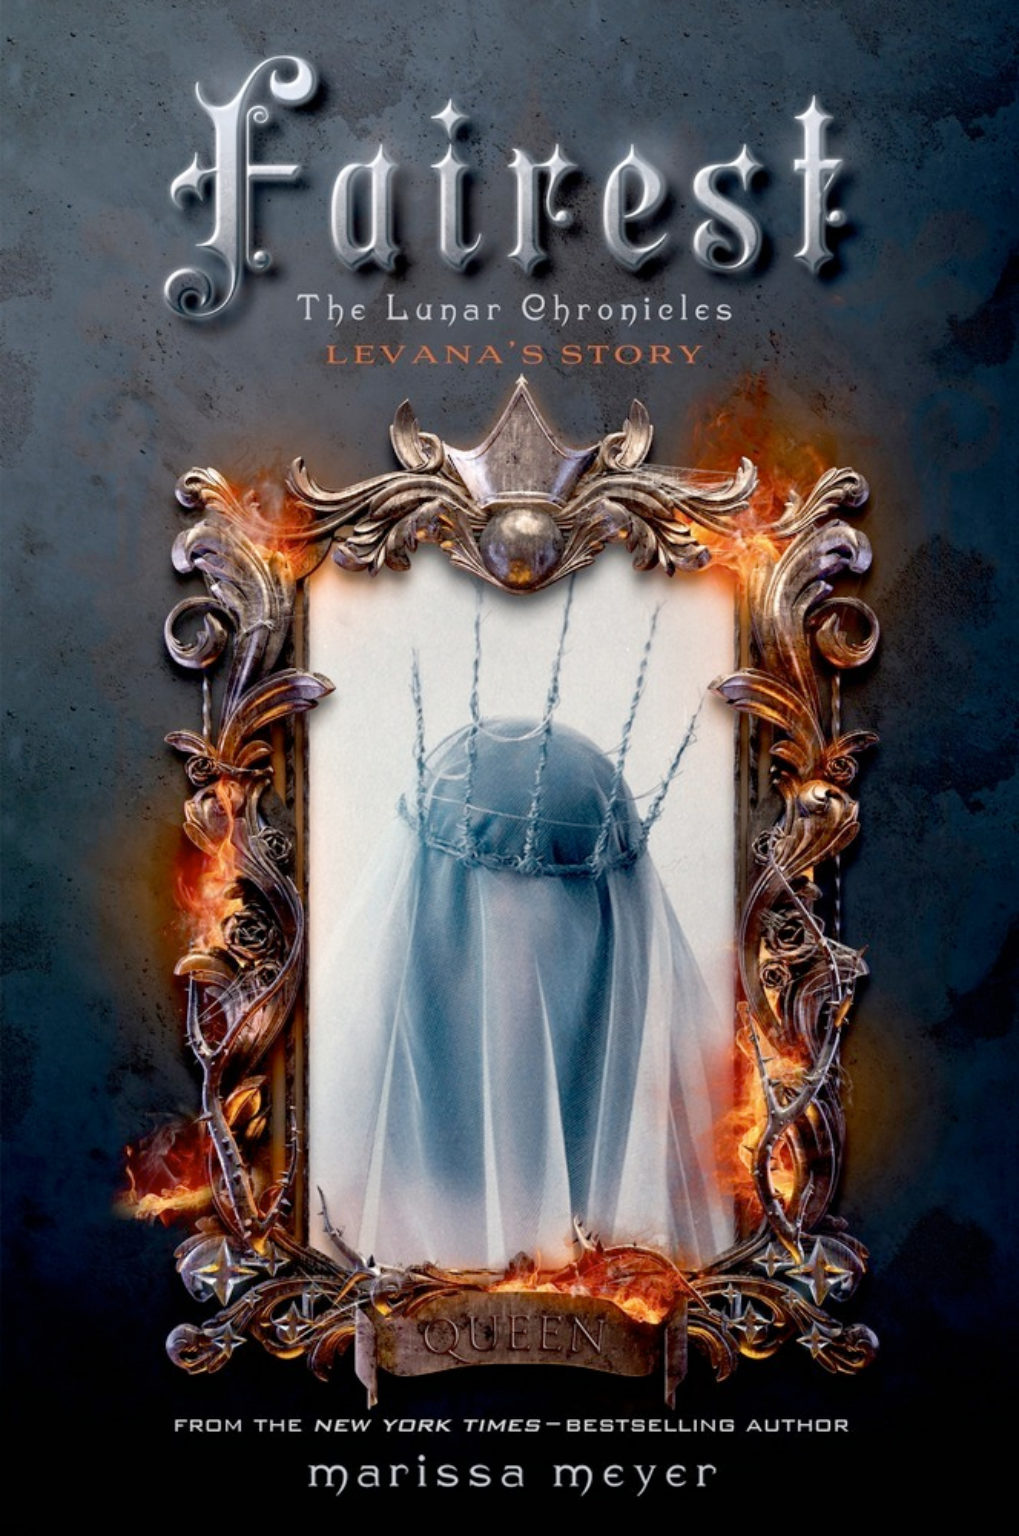 Fairest by Marissa Meyer — "The Lunar Chronicles" Series Plugged In